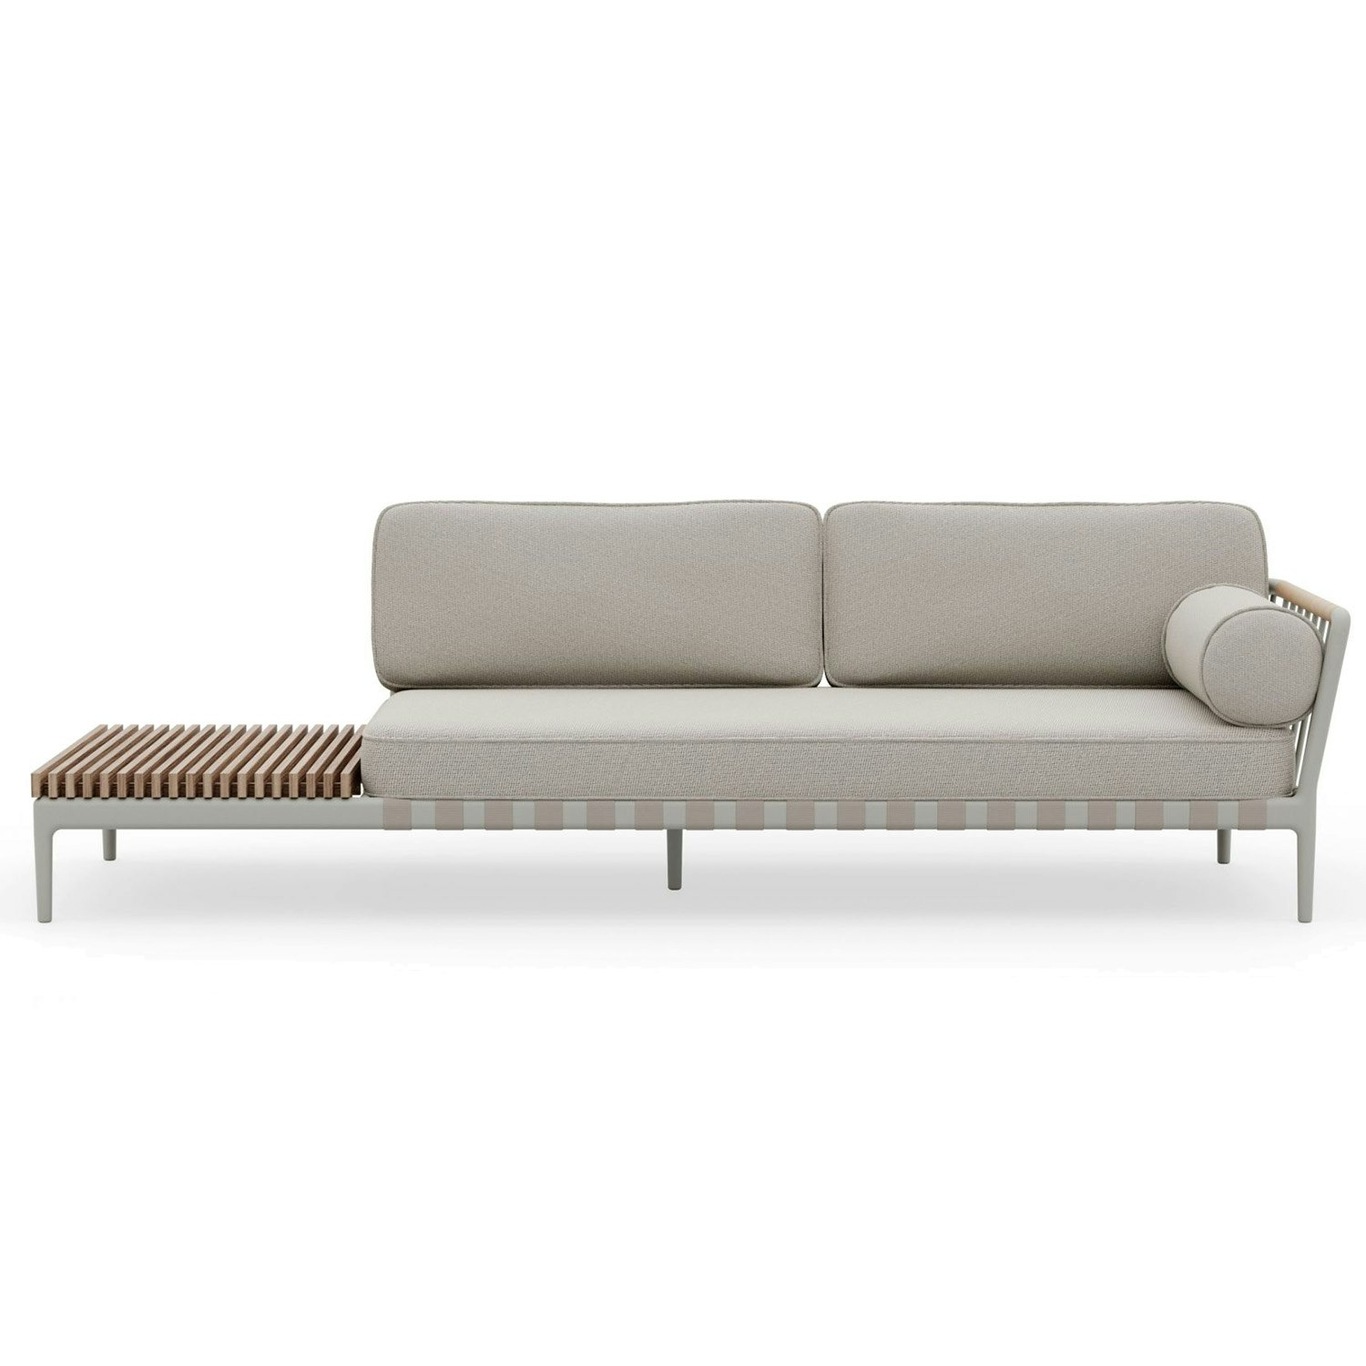 Vipp720 Open-Air Couch Open End Left, Beige